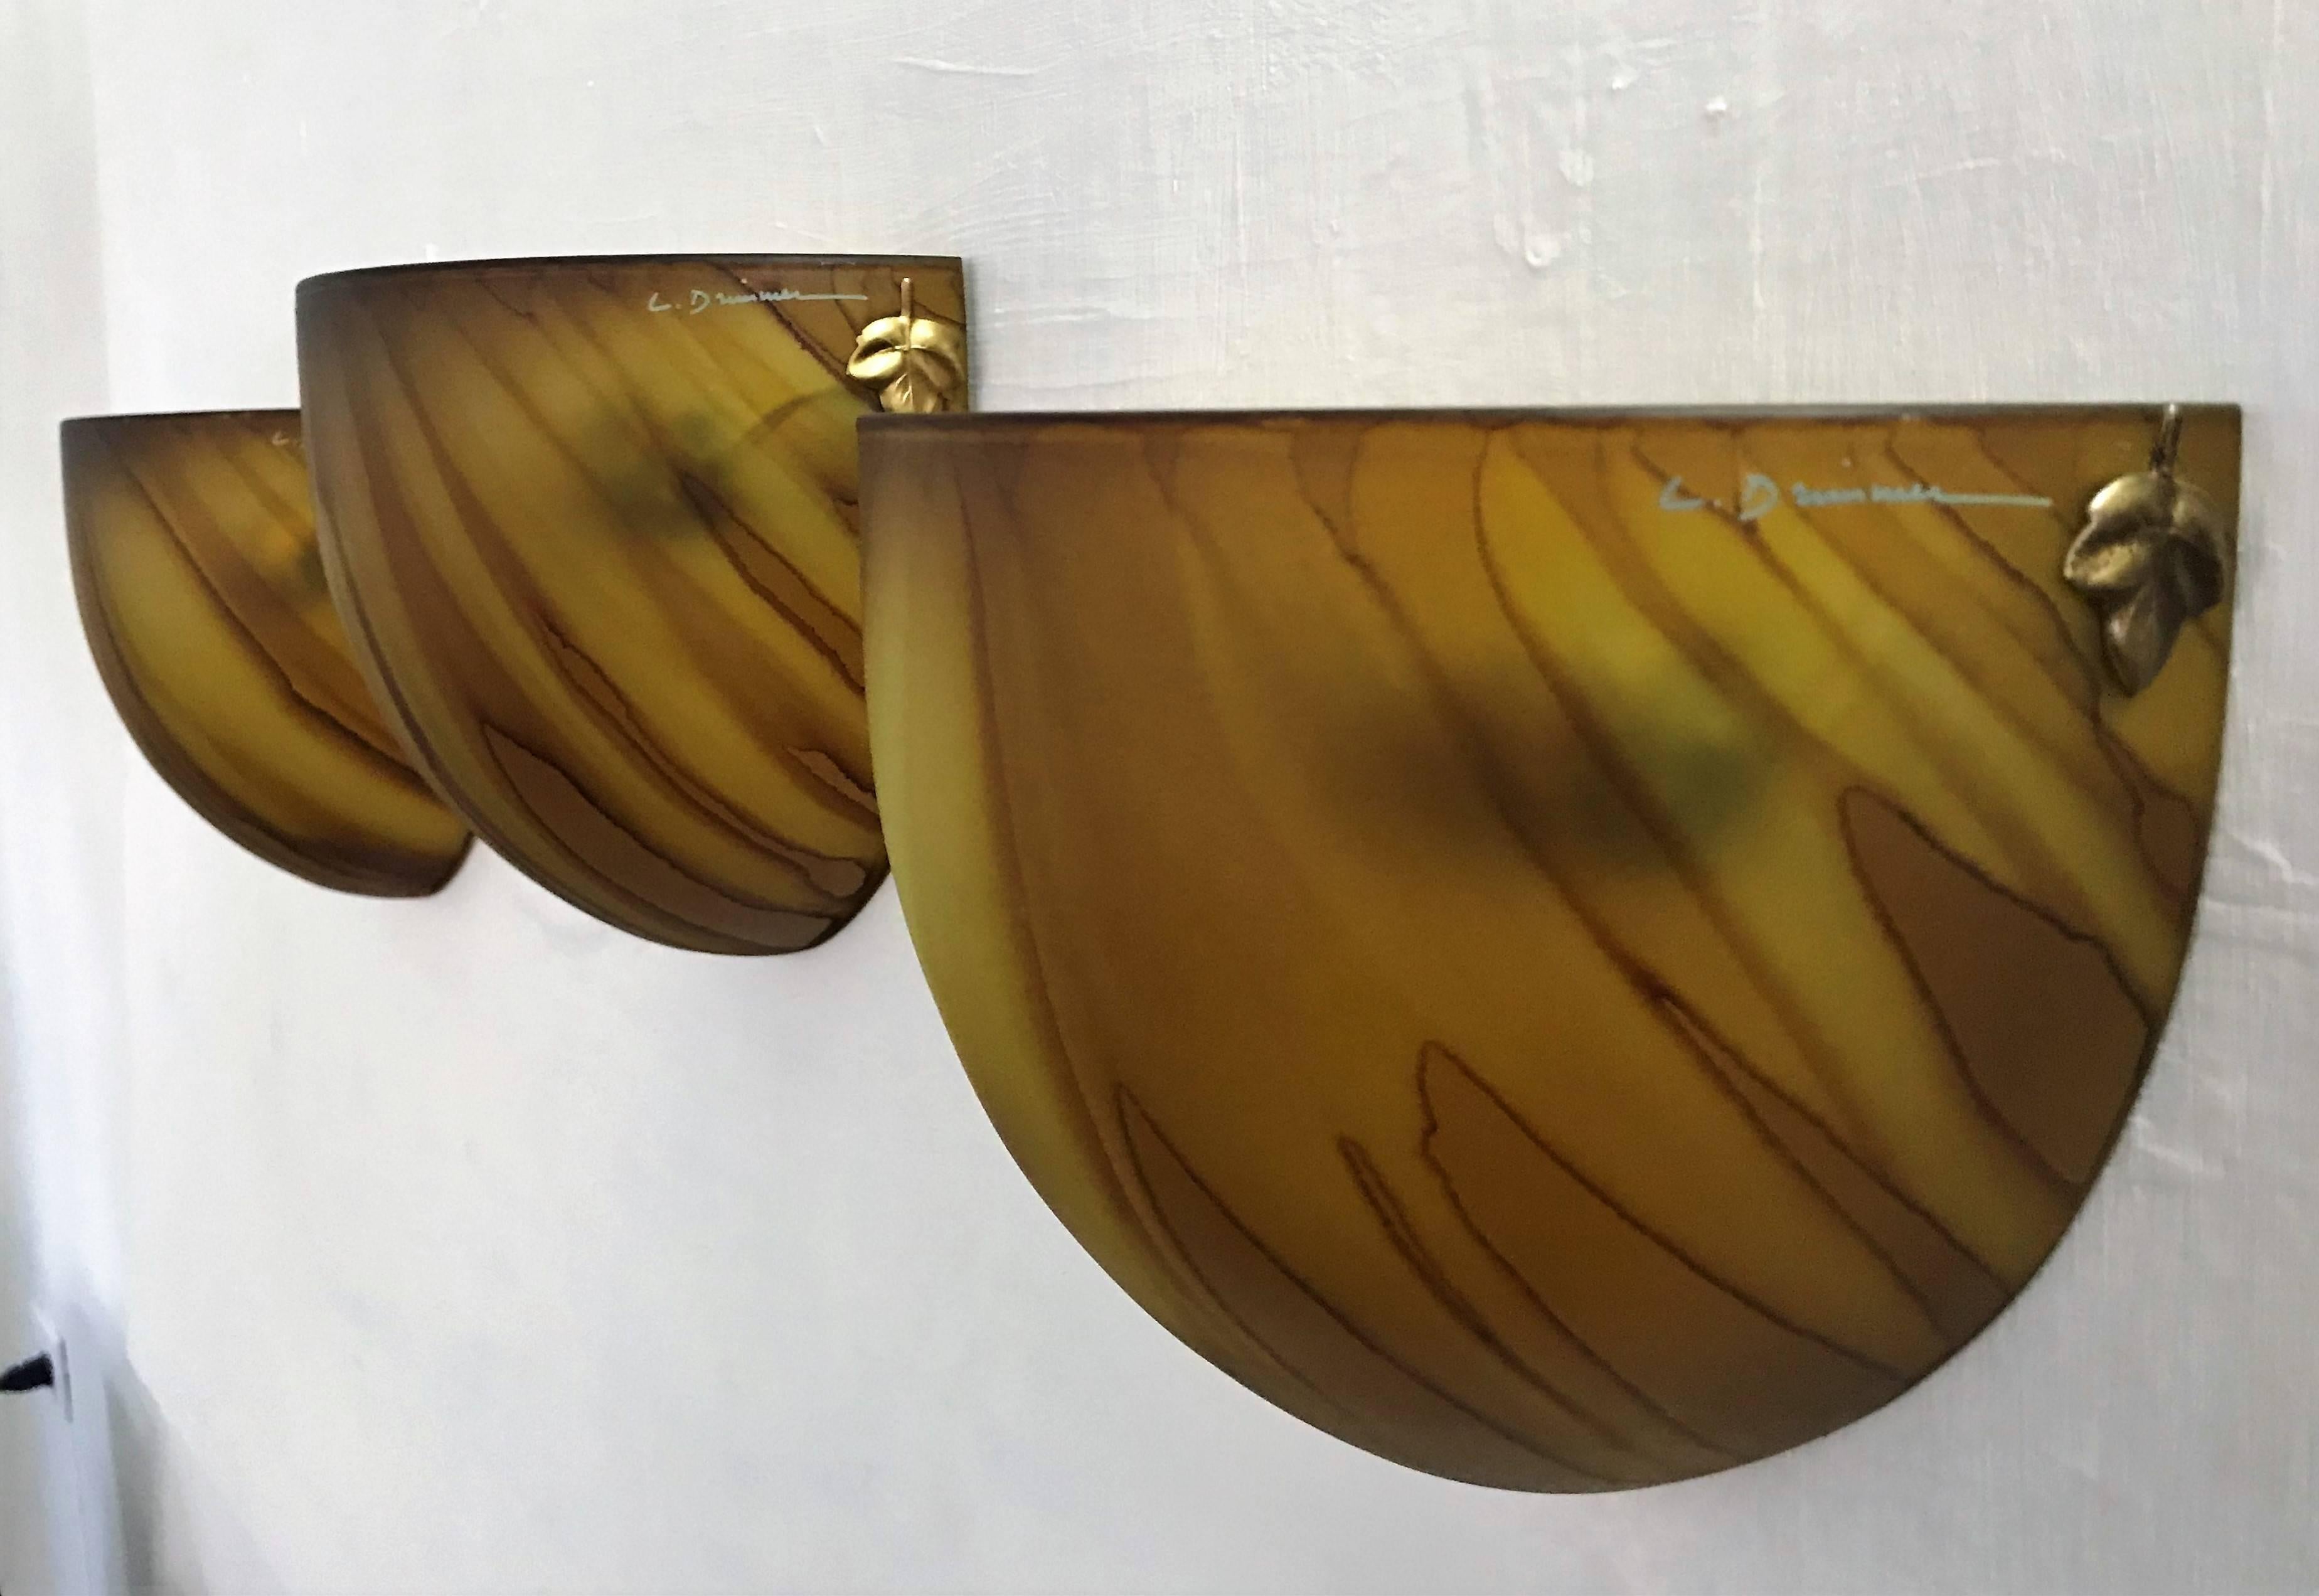 Beautiful set of three Mid-Century Modern glass sconces made in France, circa 1970 by the interior decorator Louis Drimmer, signed at the glass and still retaining the original label.